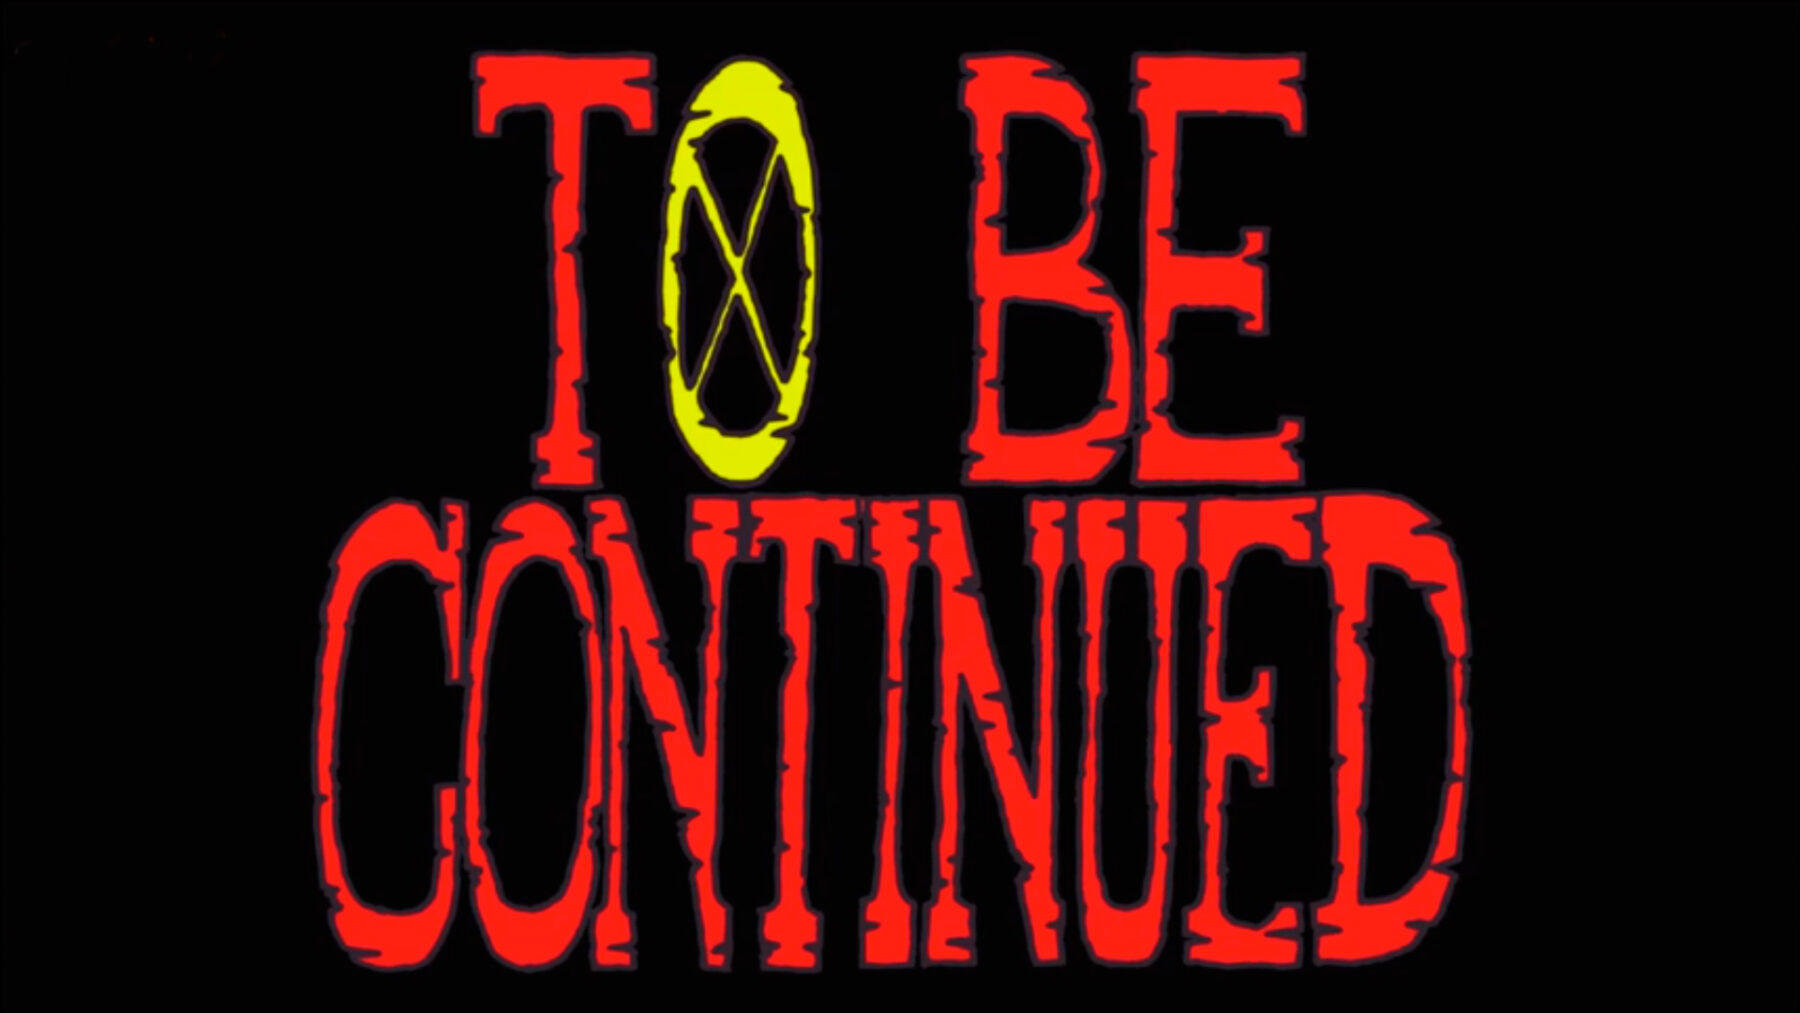 logo to be continued de one piece